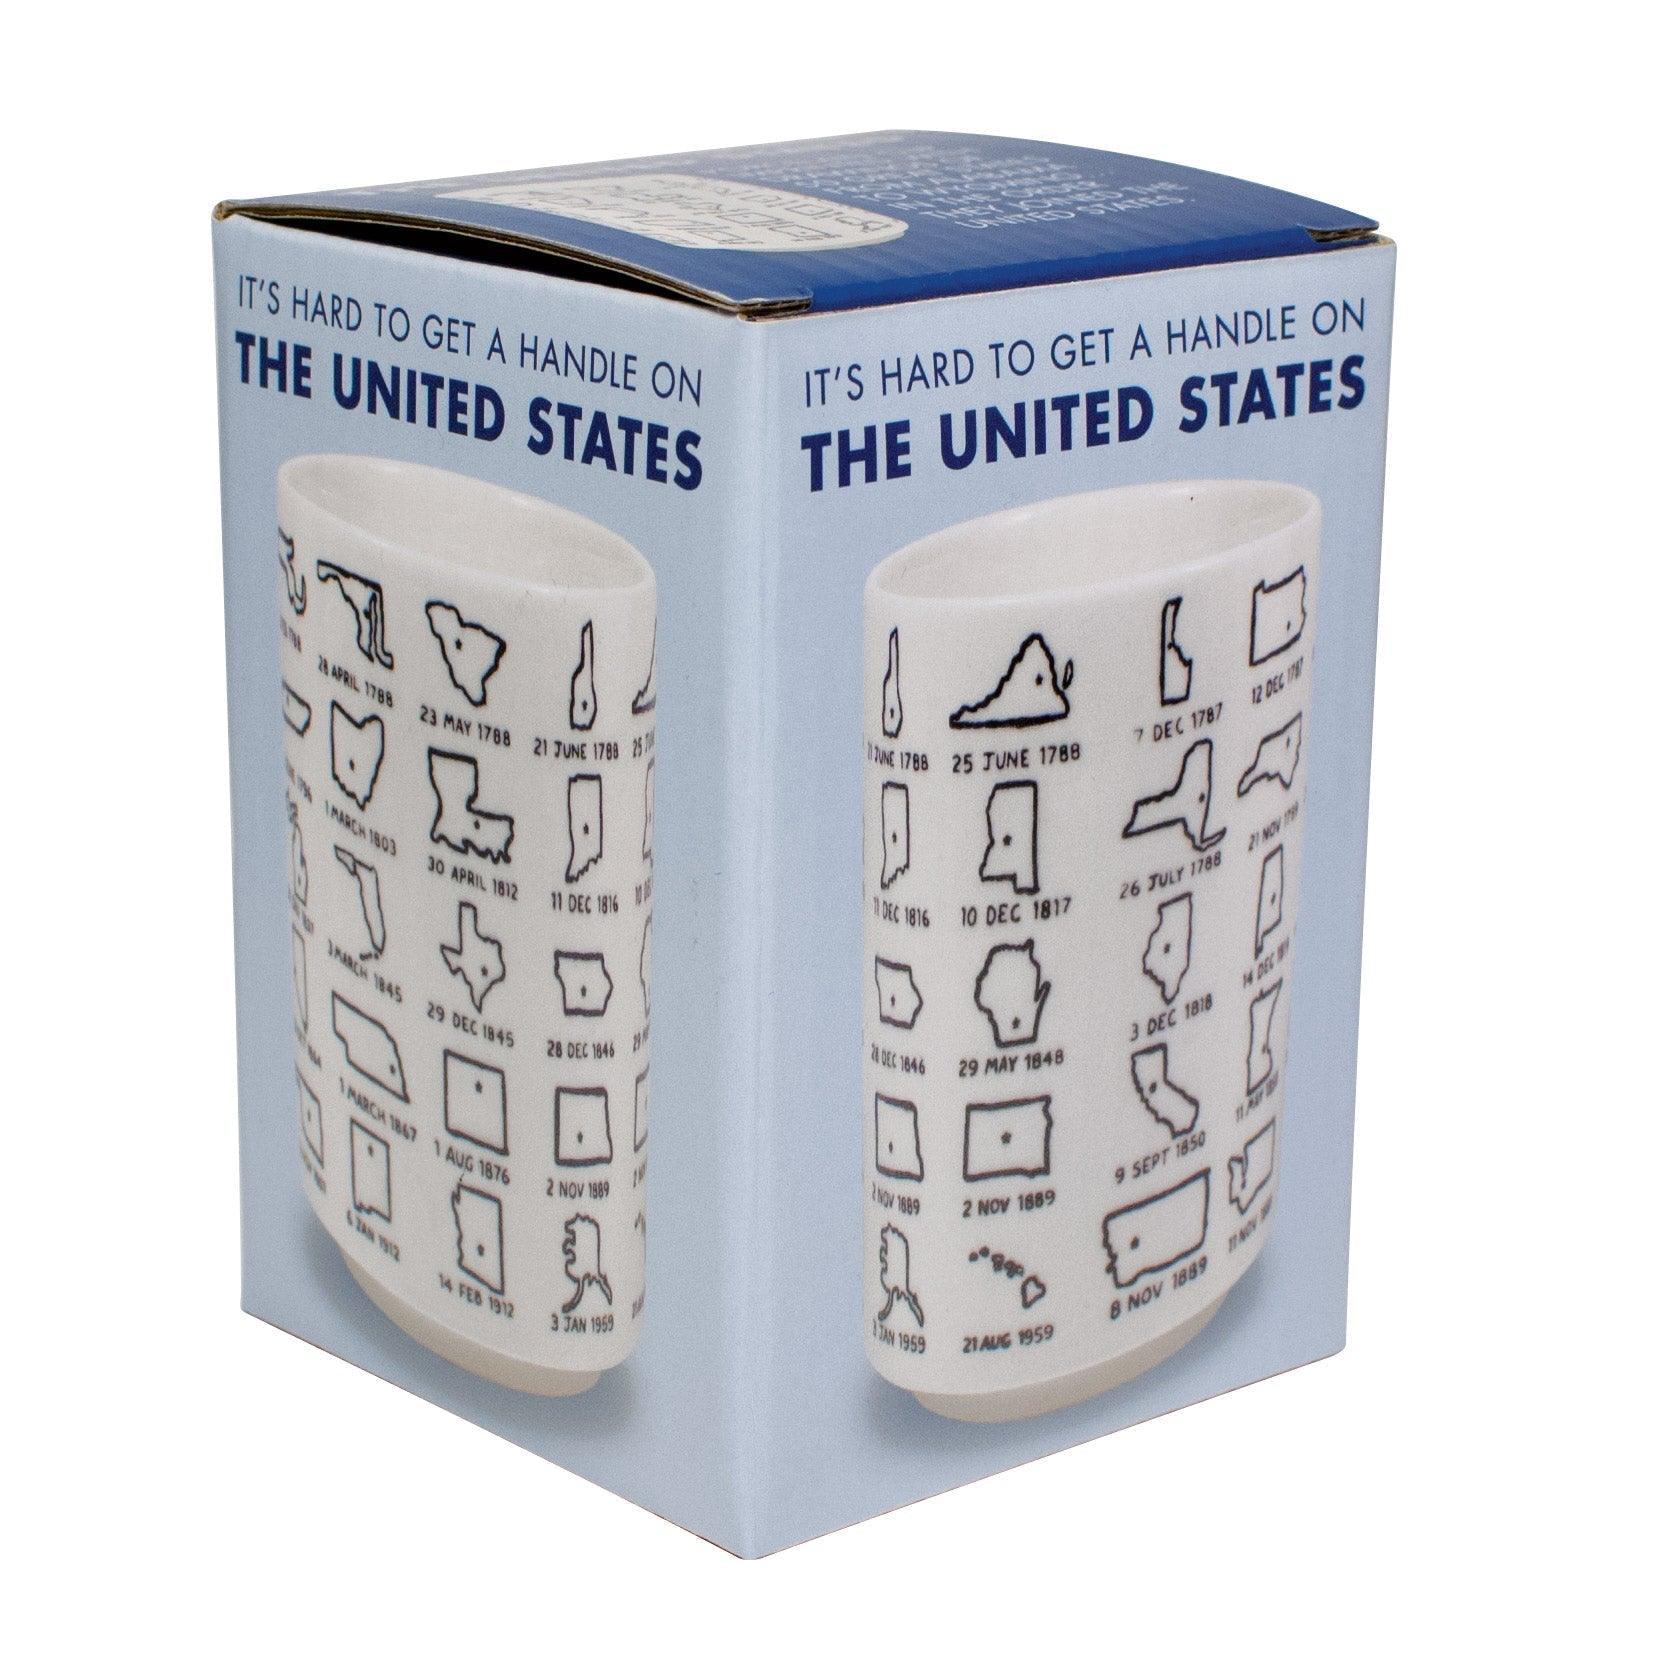 Product photo of United States Cup, a novelty gift manufactured by The Unemployed Philosophers Guild.